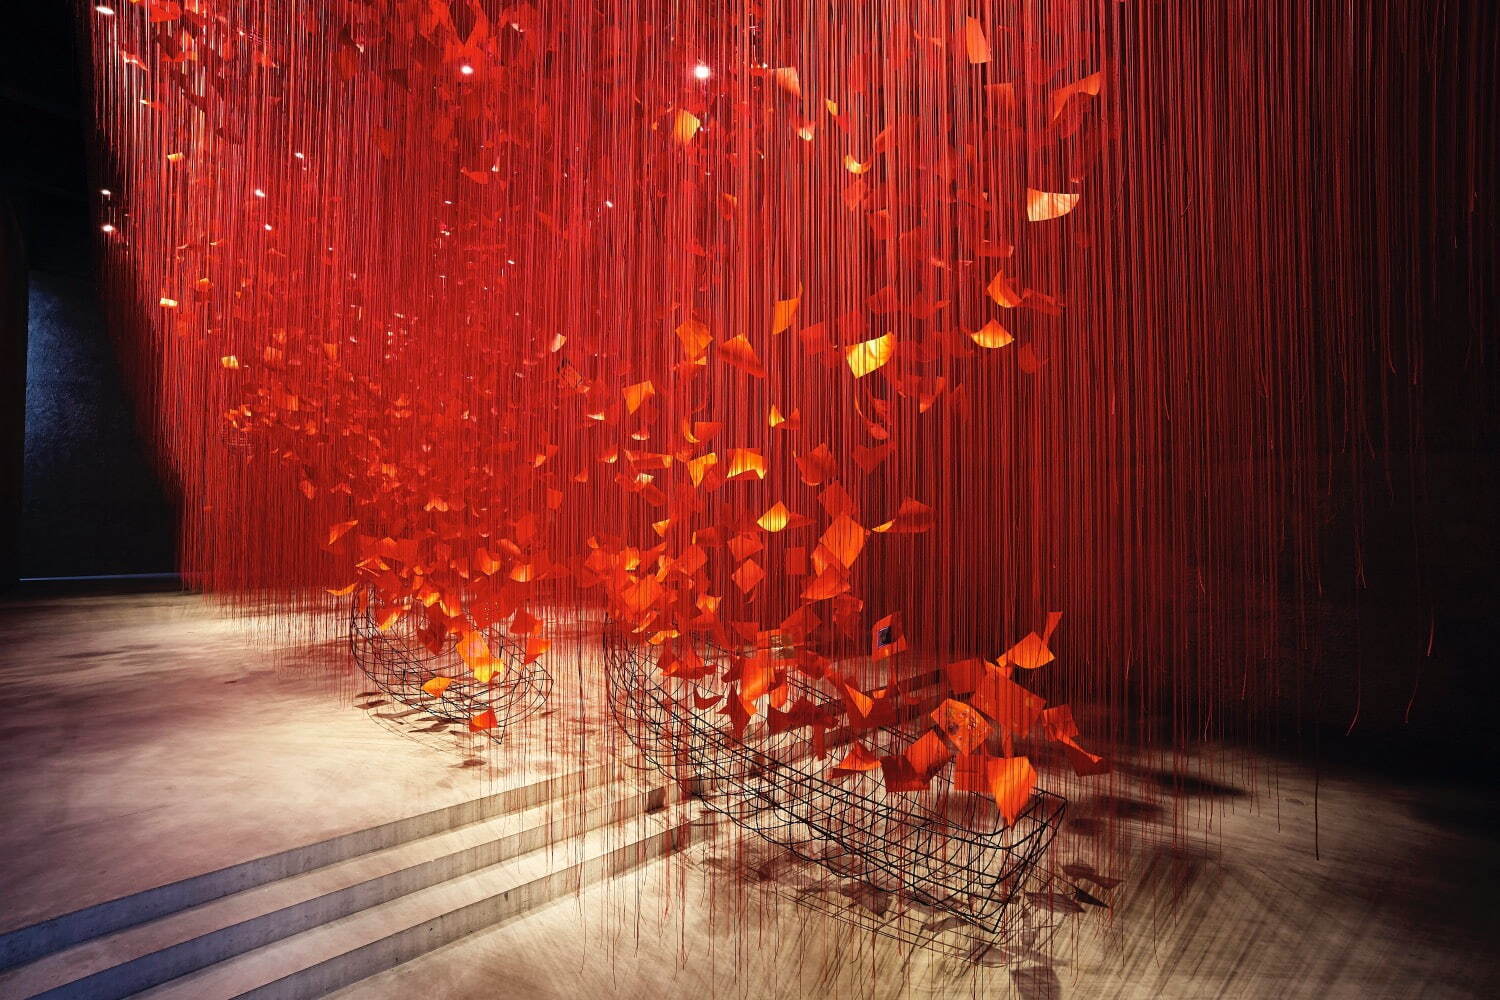 Chiharu Shiota　<i>I hope...</i>　2021　Installation: rope, paper, steel
Courtesy of K11 Art Collection
Photo by Sunhi Mang